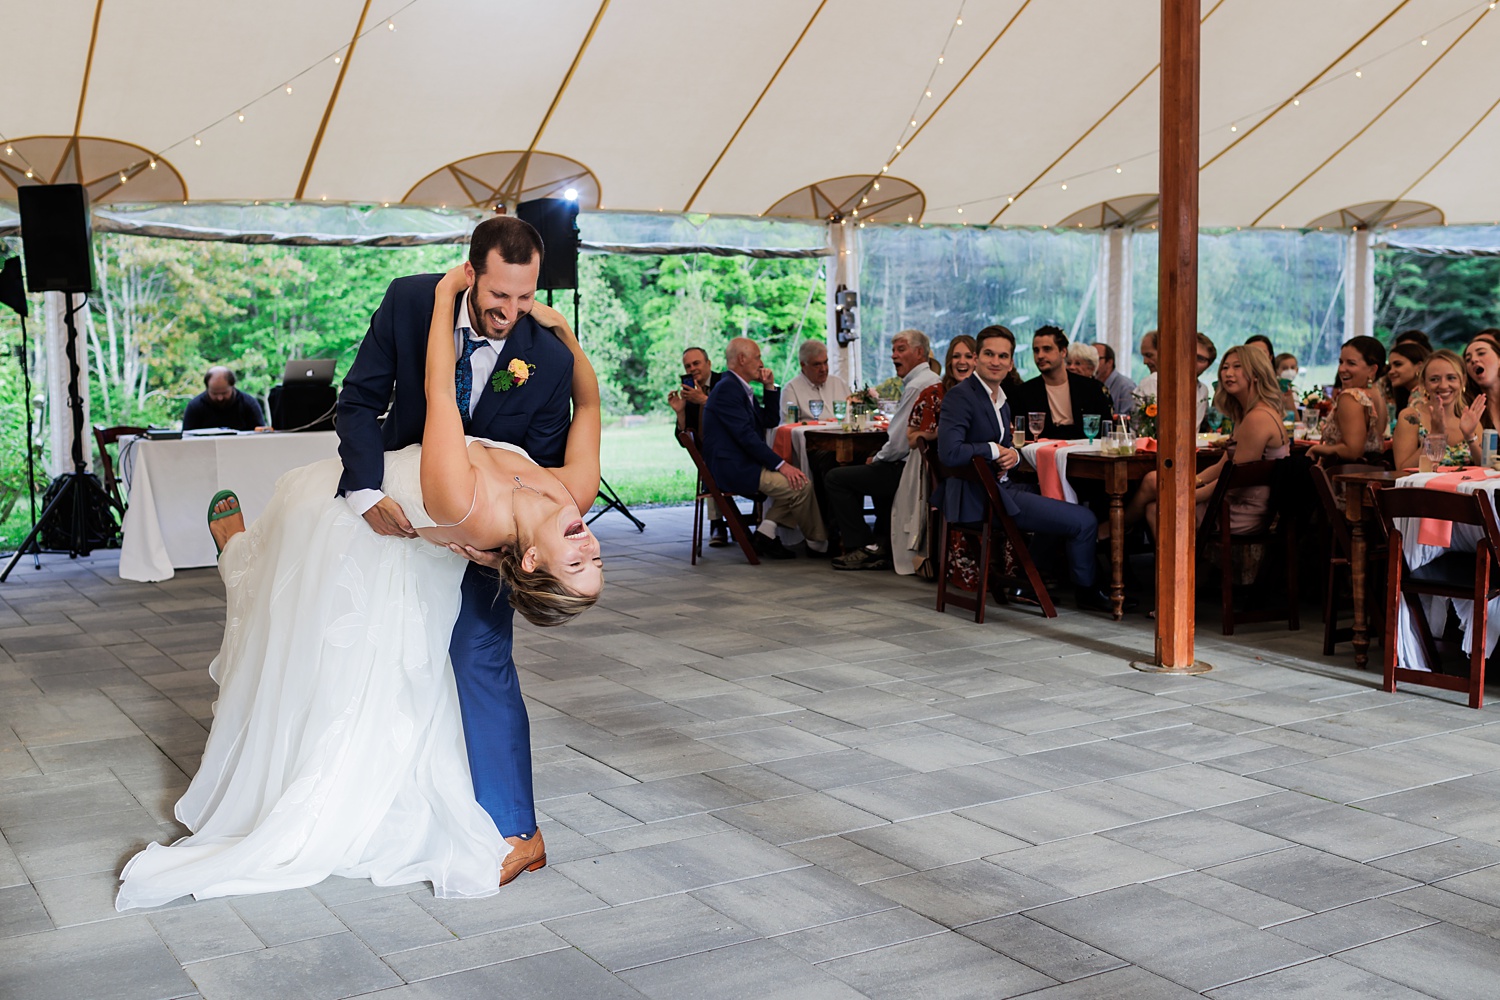 Dipping the bride during the first dance under the tent in NH